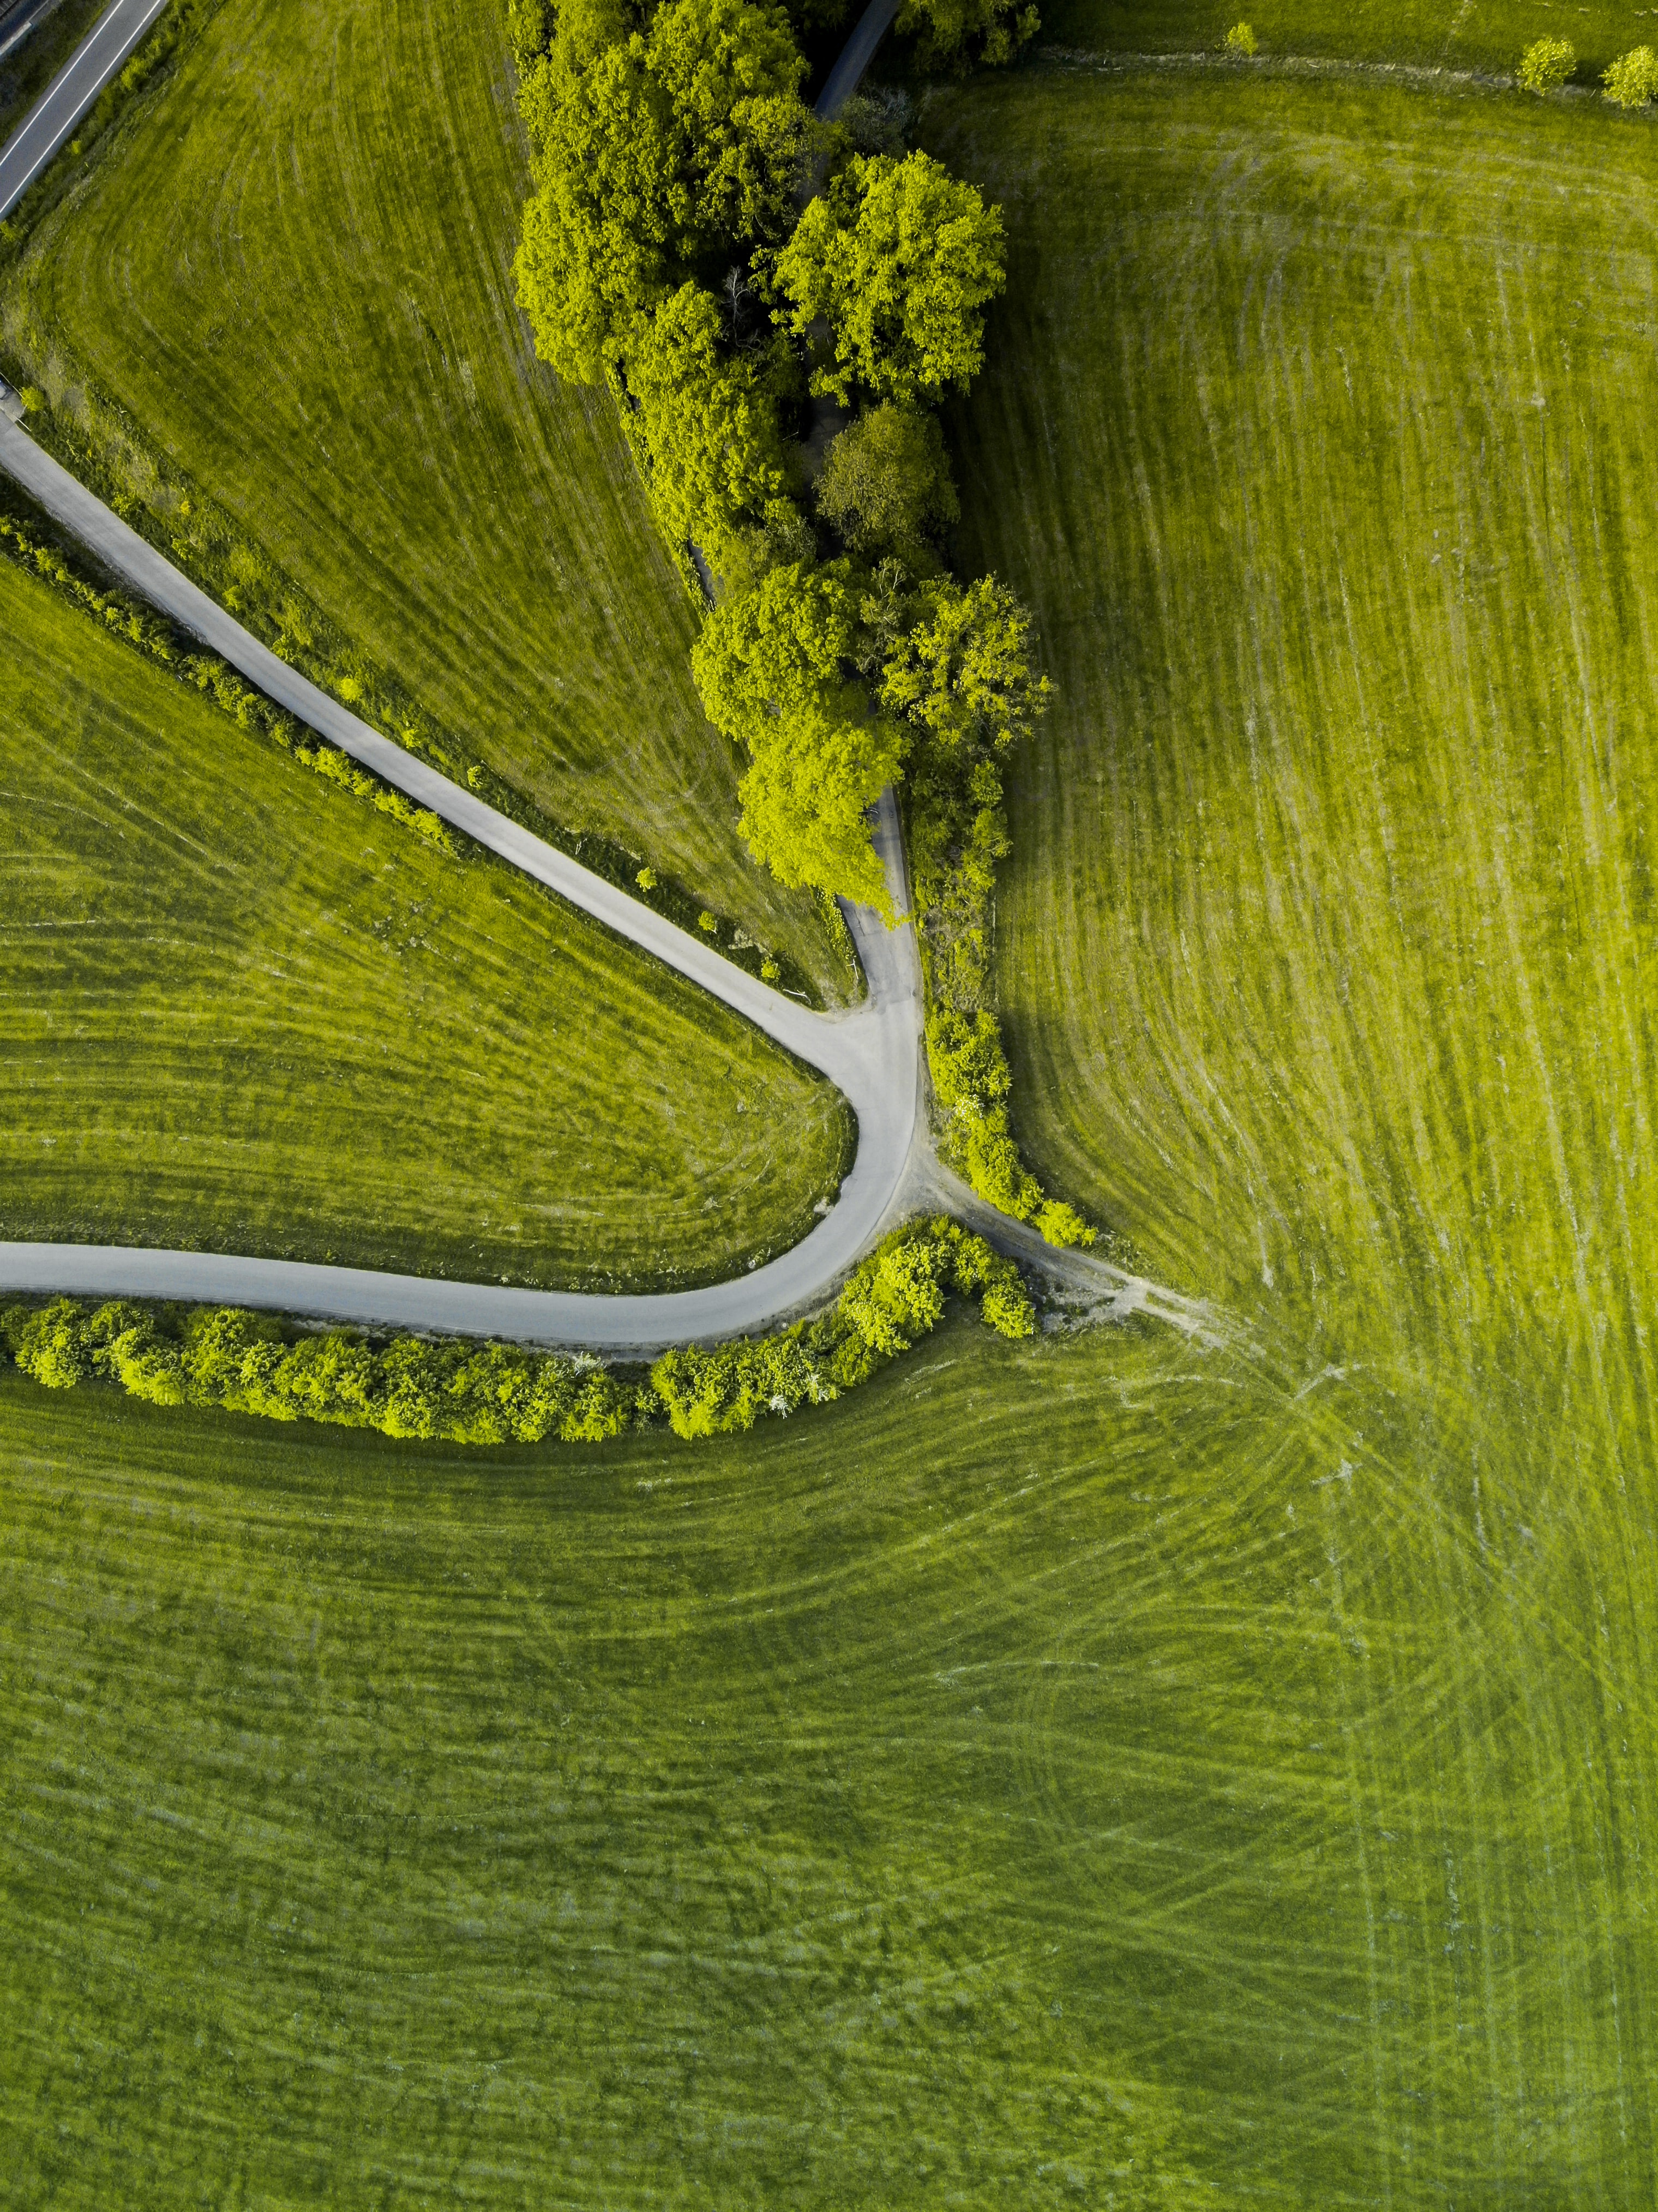 view from above, nature, trees, grass, road, winding, sinuous for android